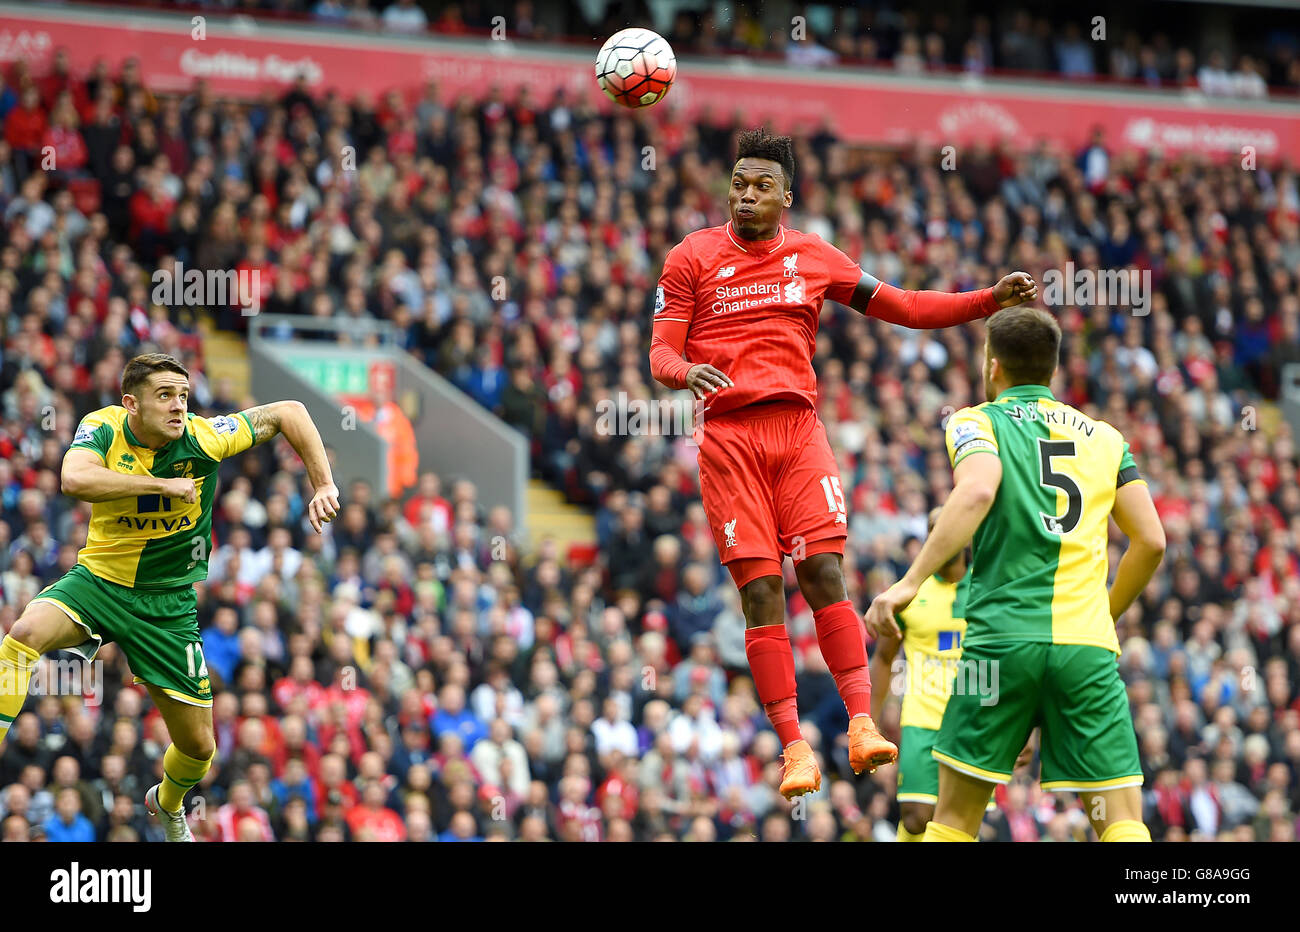 Liverpool's Daniel Sturridge in action during the Barclays Premier League match at Anfield, Liverpool. Stock Photo